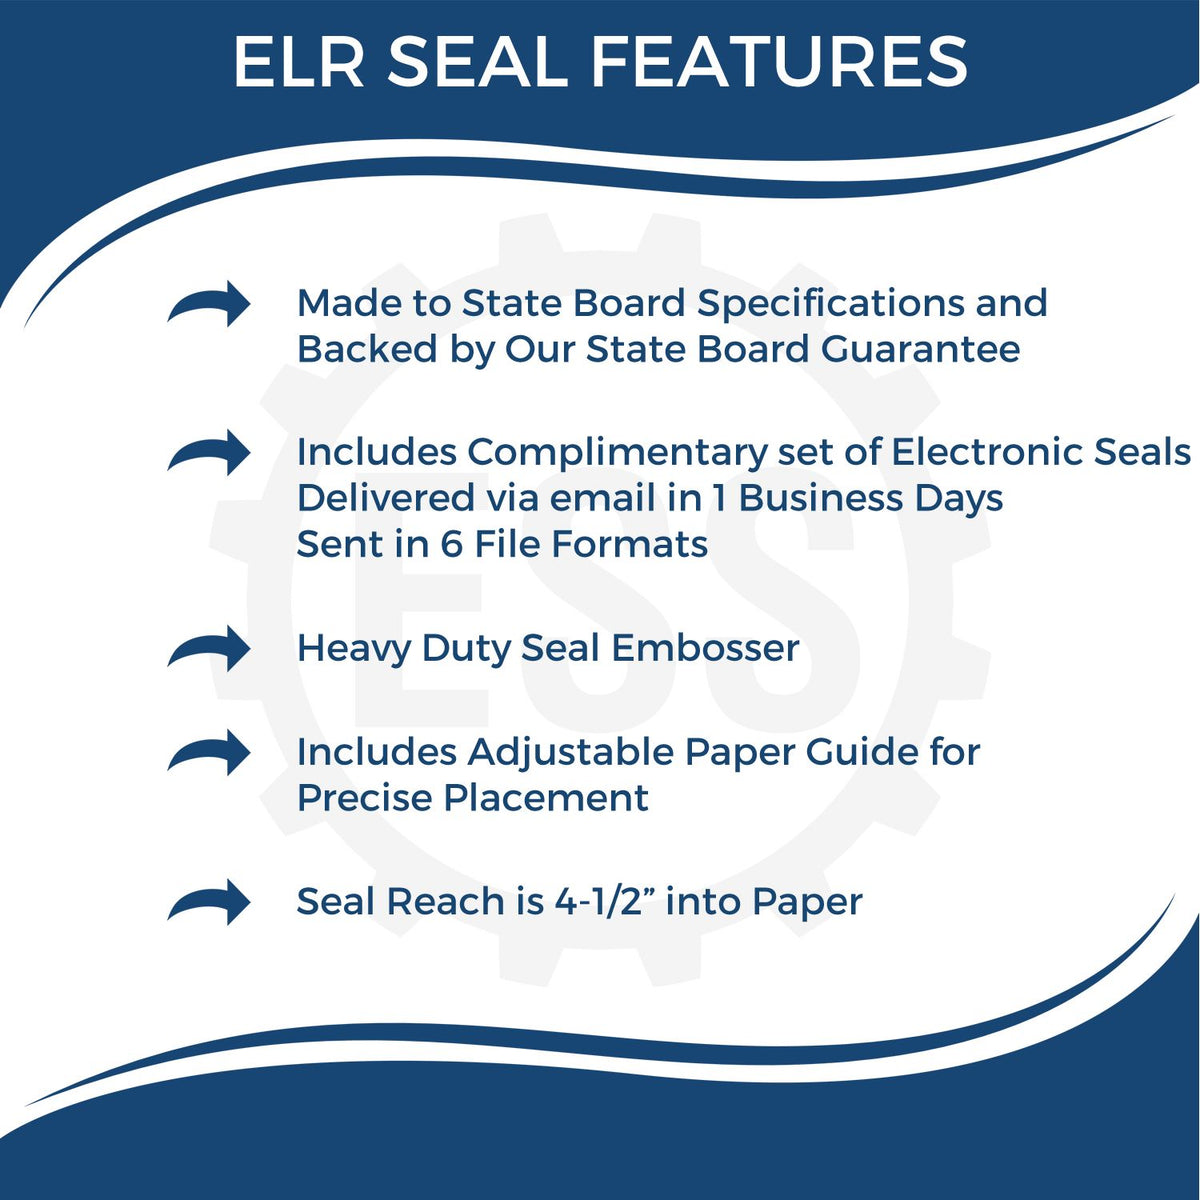 A picture of an infographic highlighting the selling points for the State of Illinois Extended Long Reach Engineer Seal